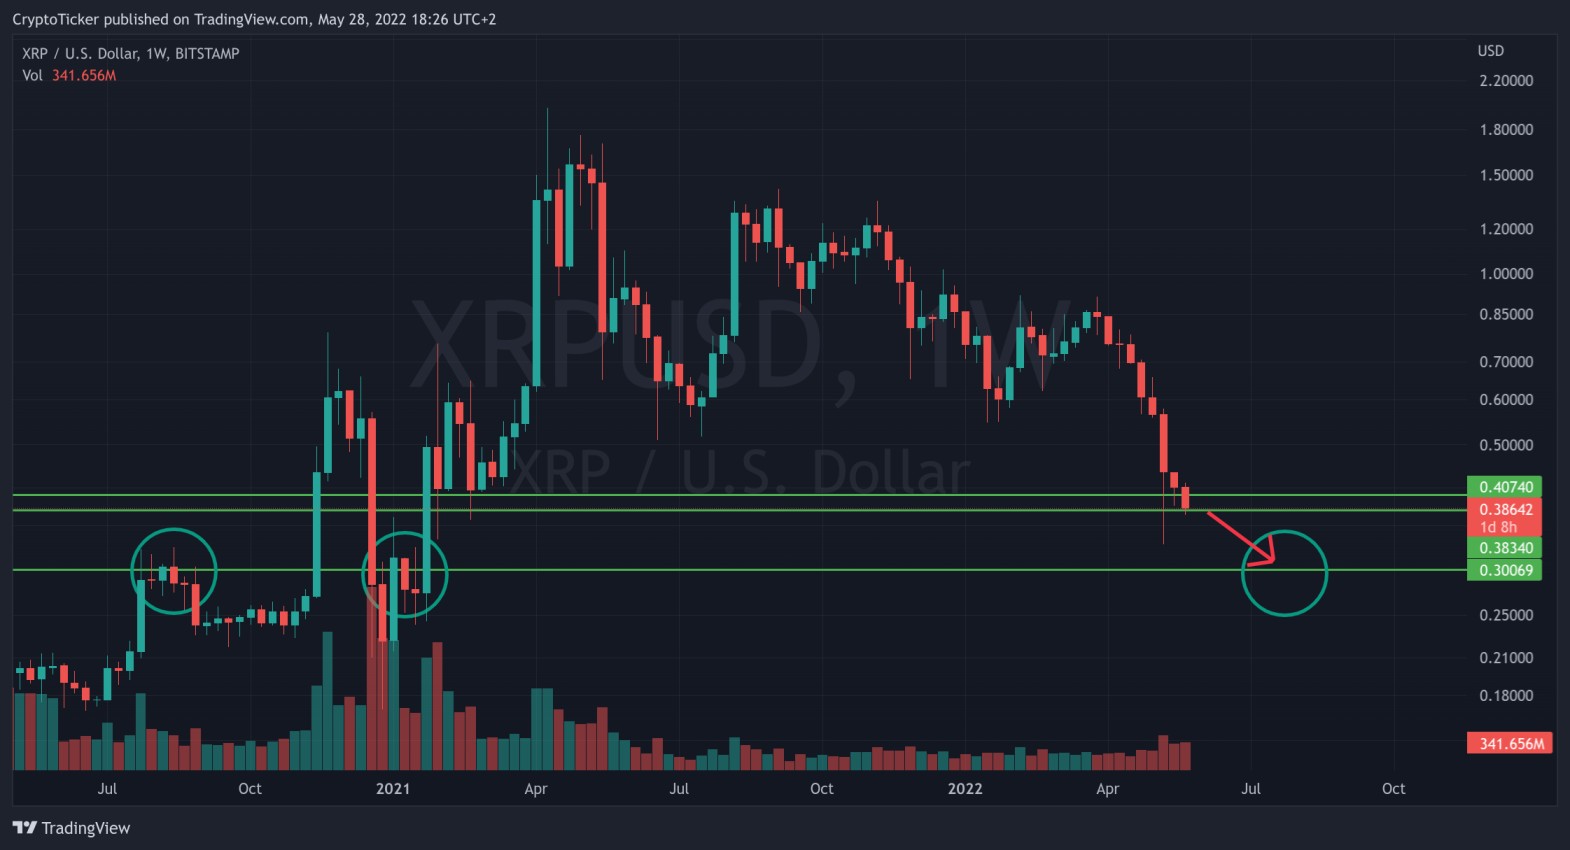 XRP/USD 1-week chart showing the potential further crash of XRP